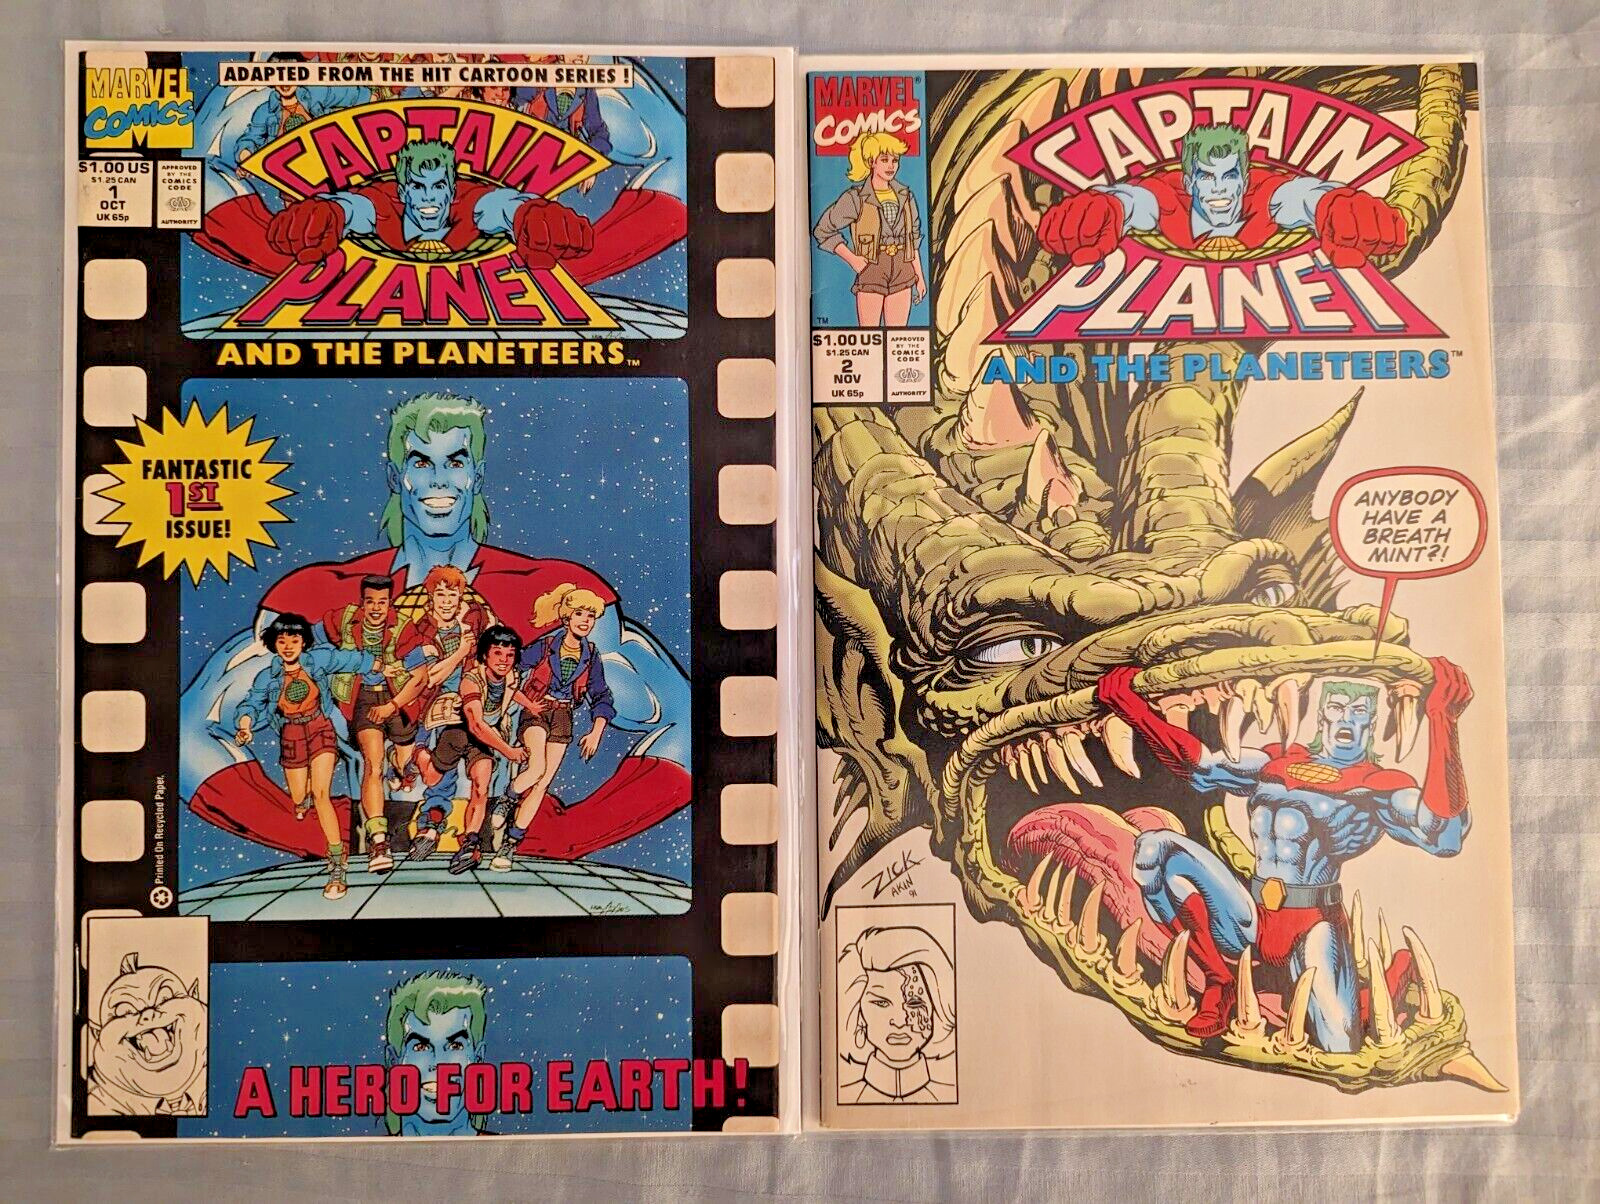 Captain Planet and the Planeteers #1 & 2 Marvel Comics (1991) Lot of 2